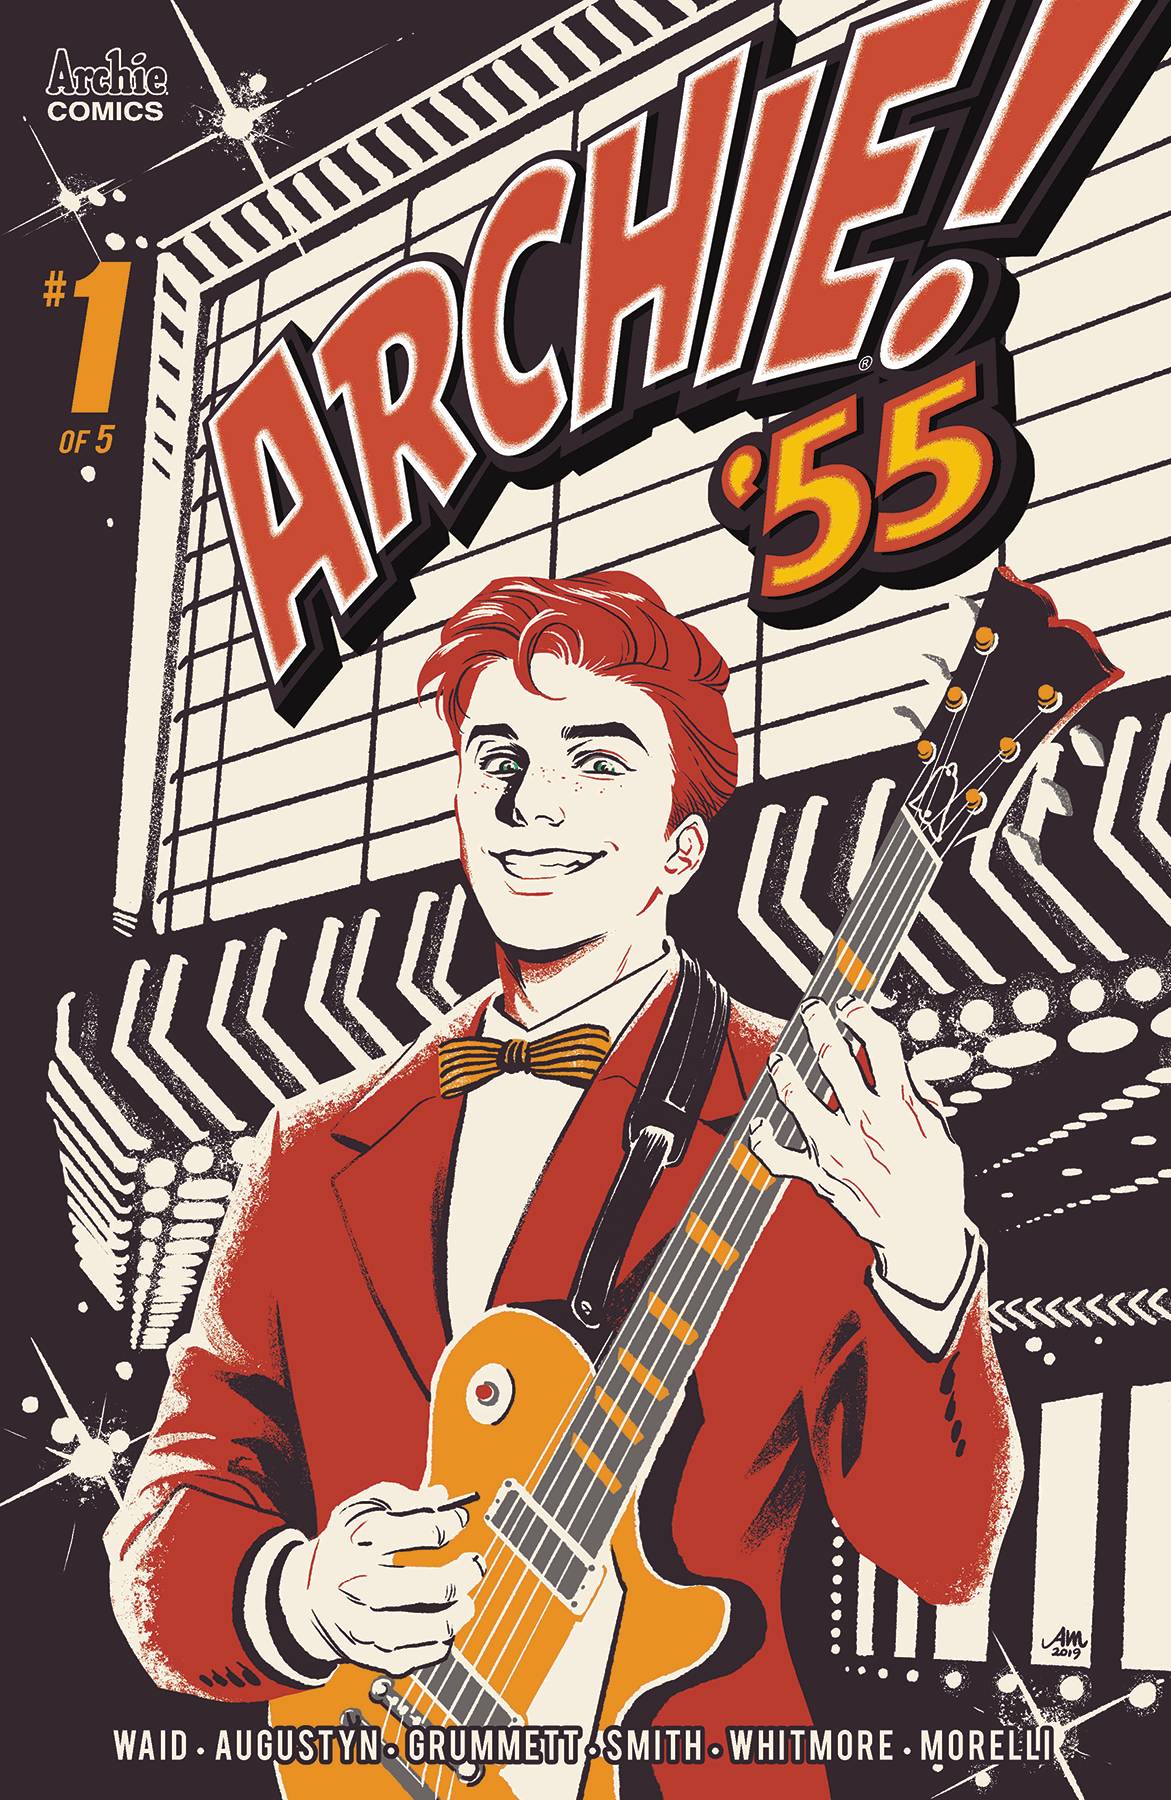 Archie 1955 #1 Cover A Mok (Of 5)